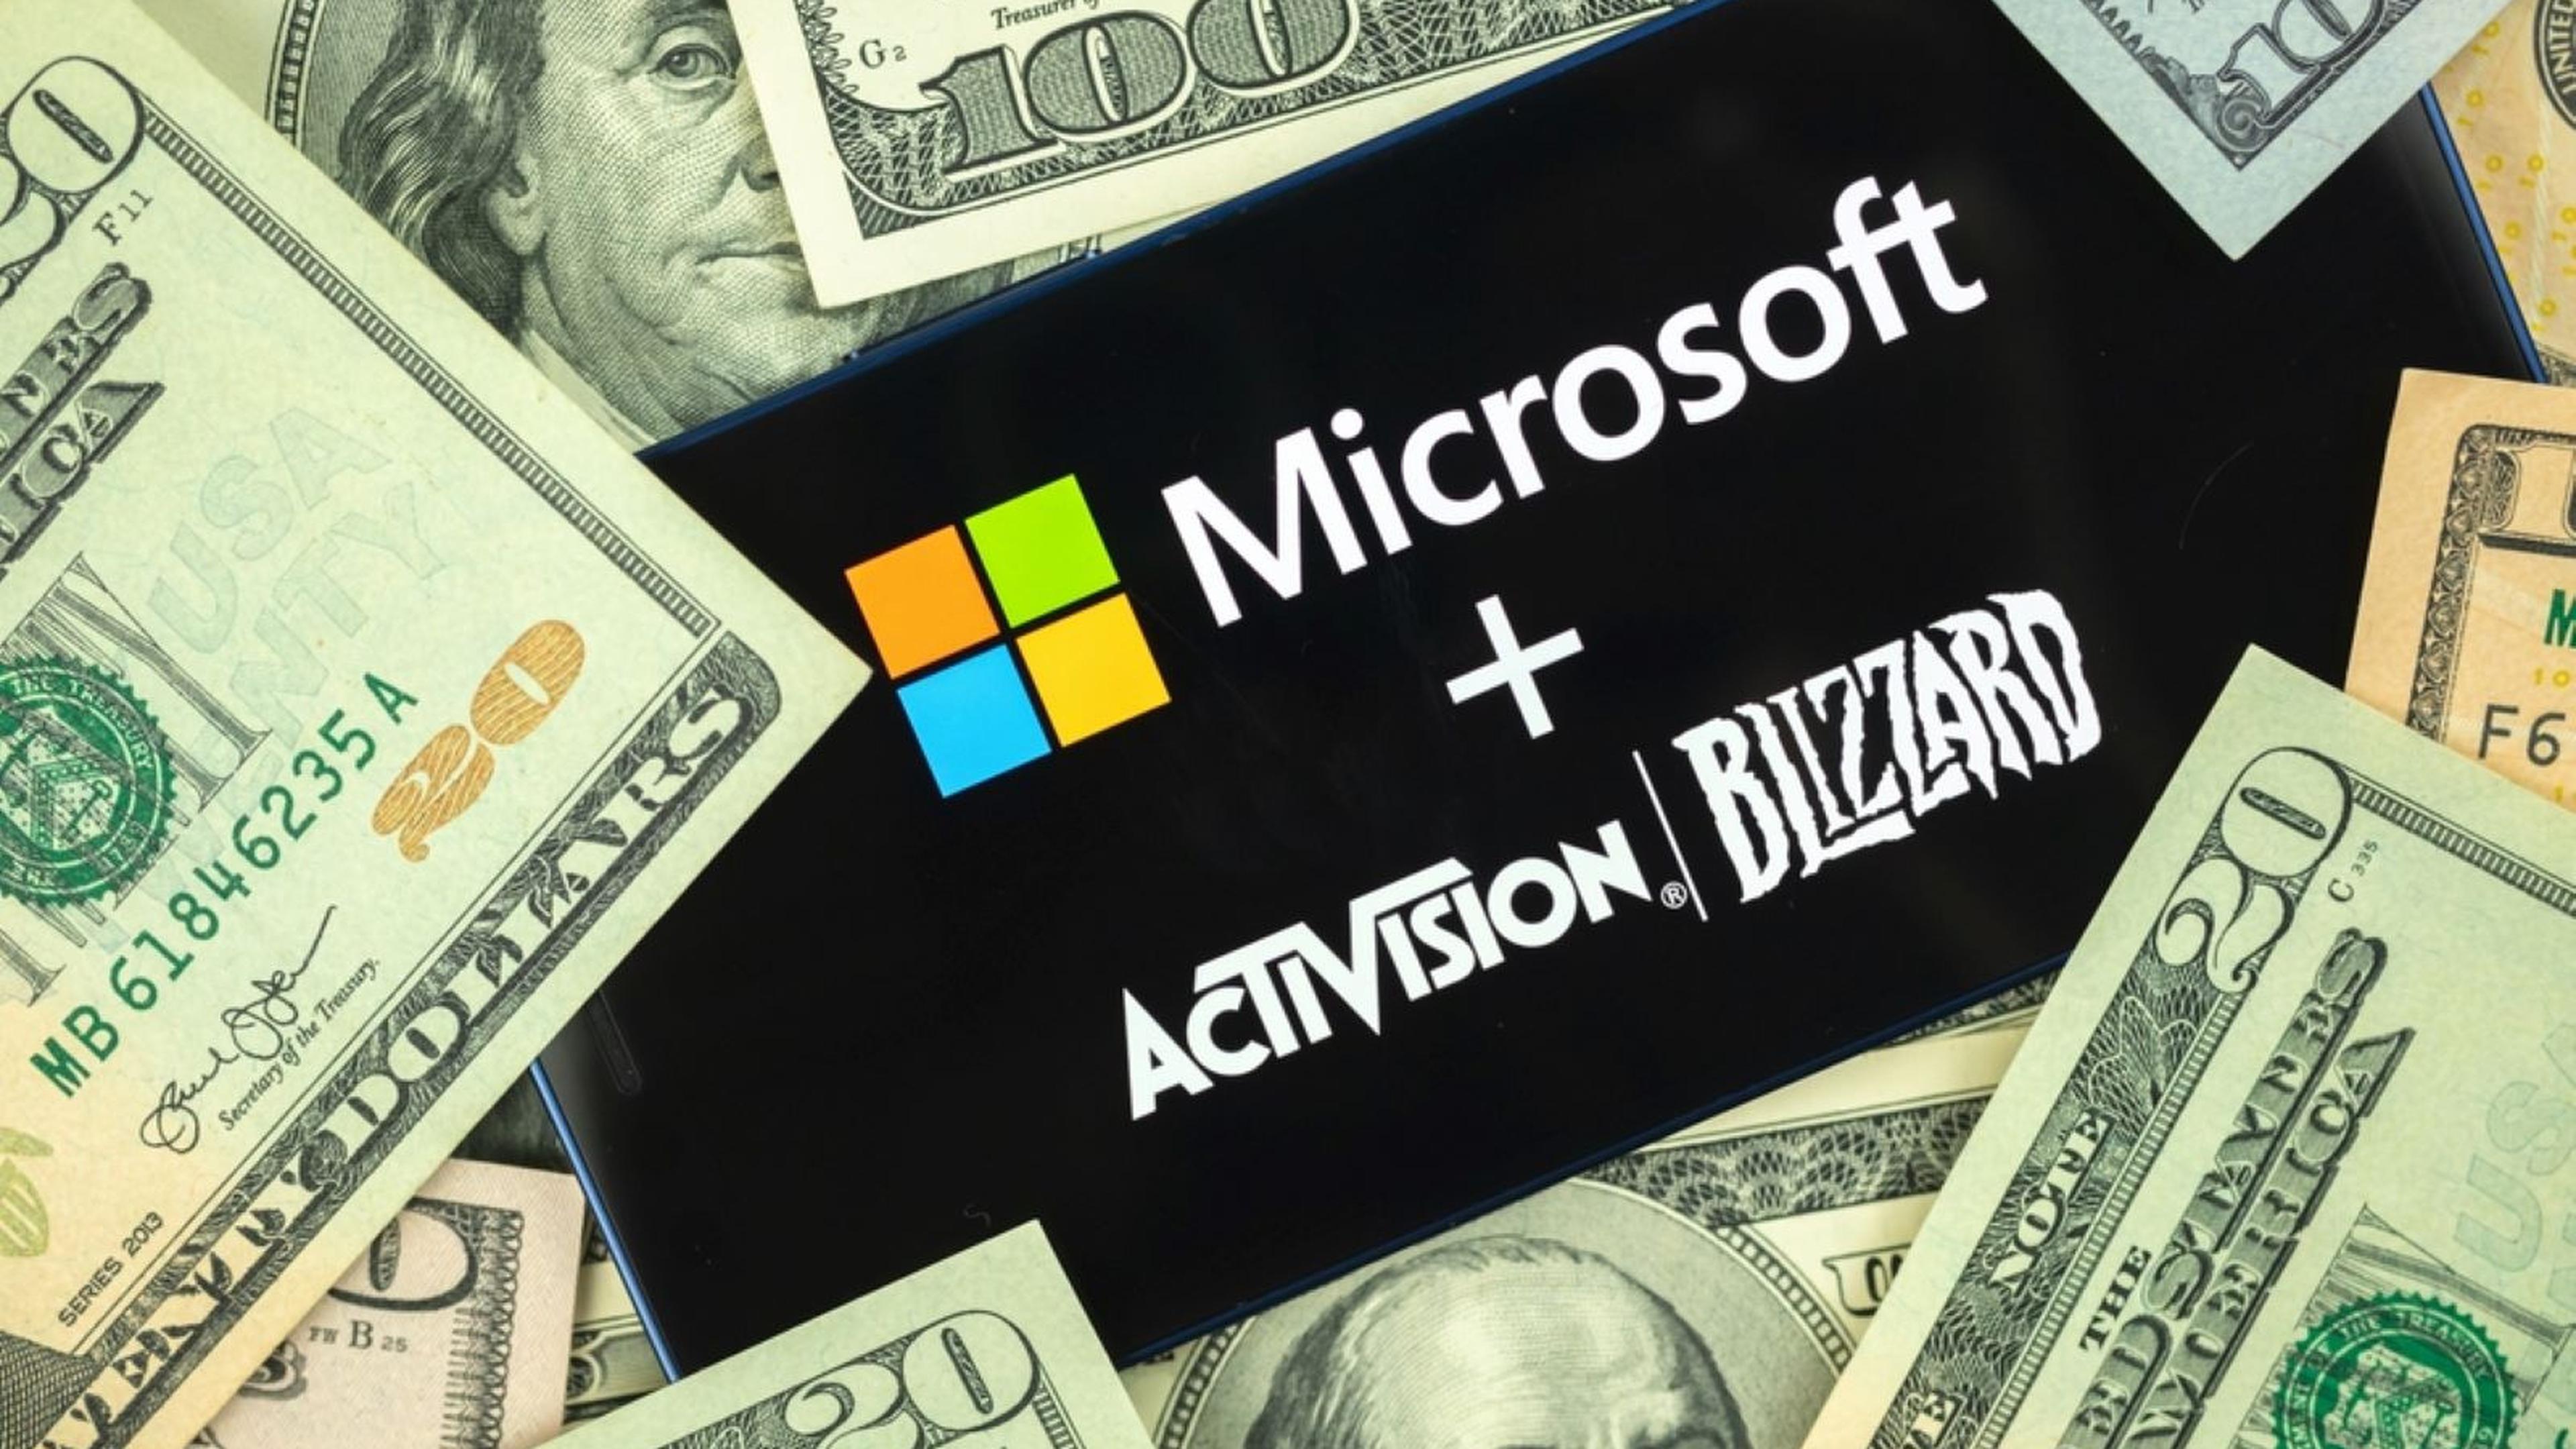 E.U. Approves Microsoft's $69 Billion Deal for Activision - The